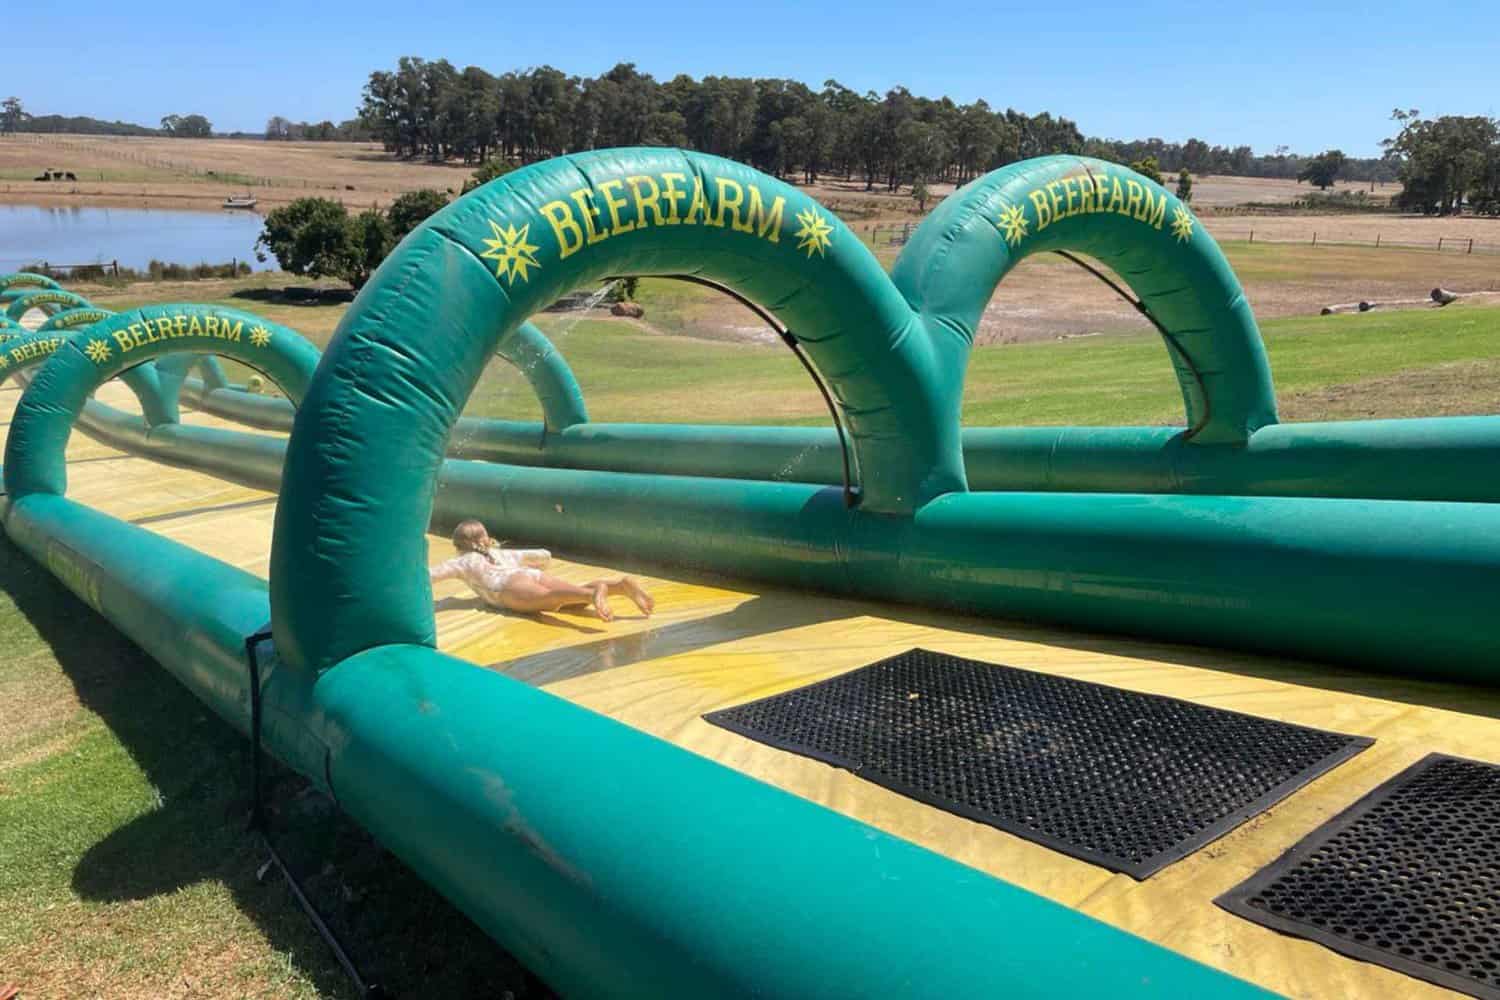 Kids having fun as they slide down a wet and slippery slide at the Beerfarm Margaret River, (one of the best breweries Margaret River!) with water splashing around them and bright smiles on their faces.